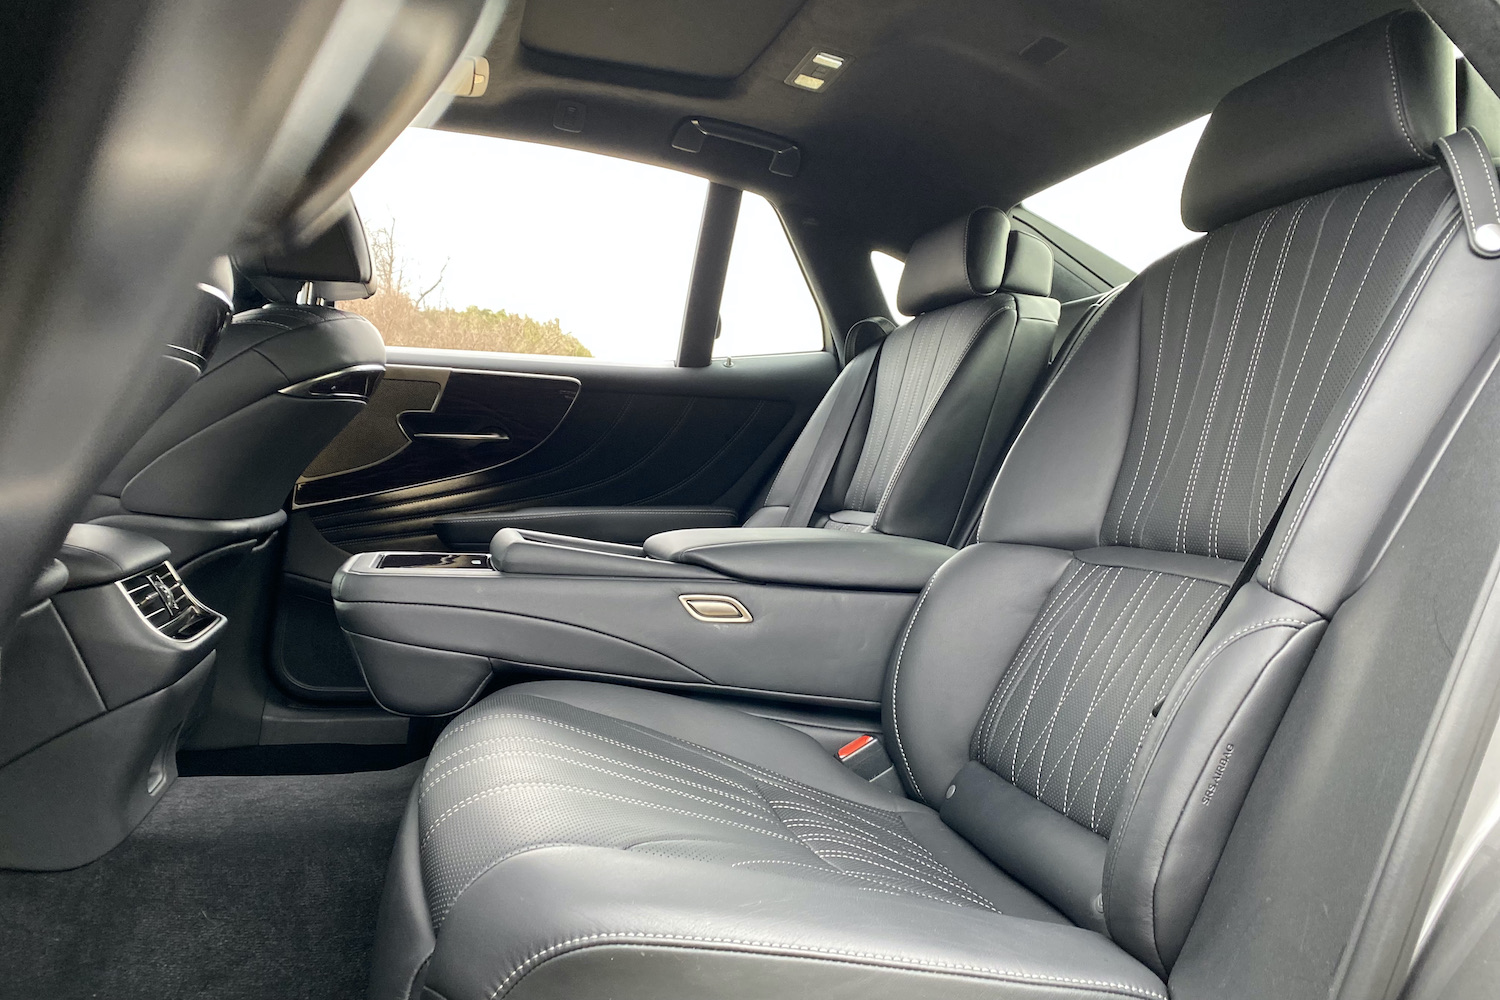 A close-up of rear seats in the 2021 Lexus LS500 from outside the car.